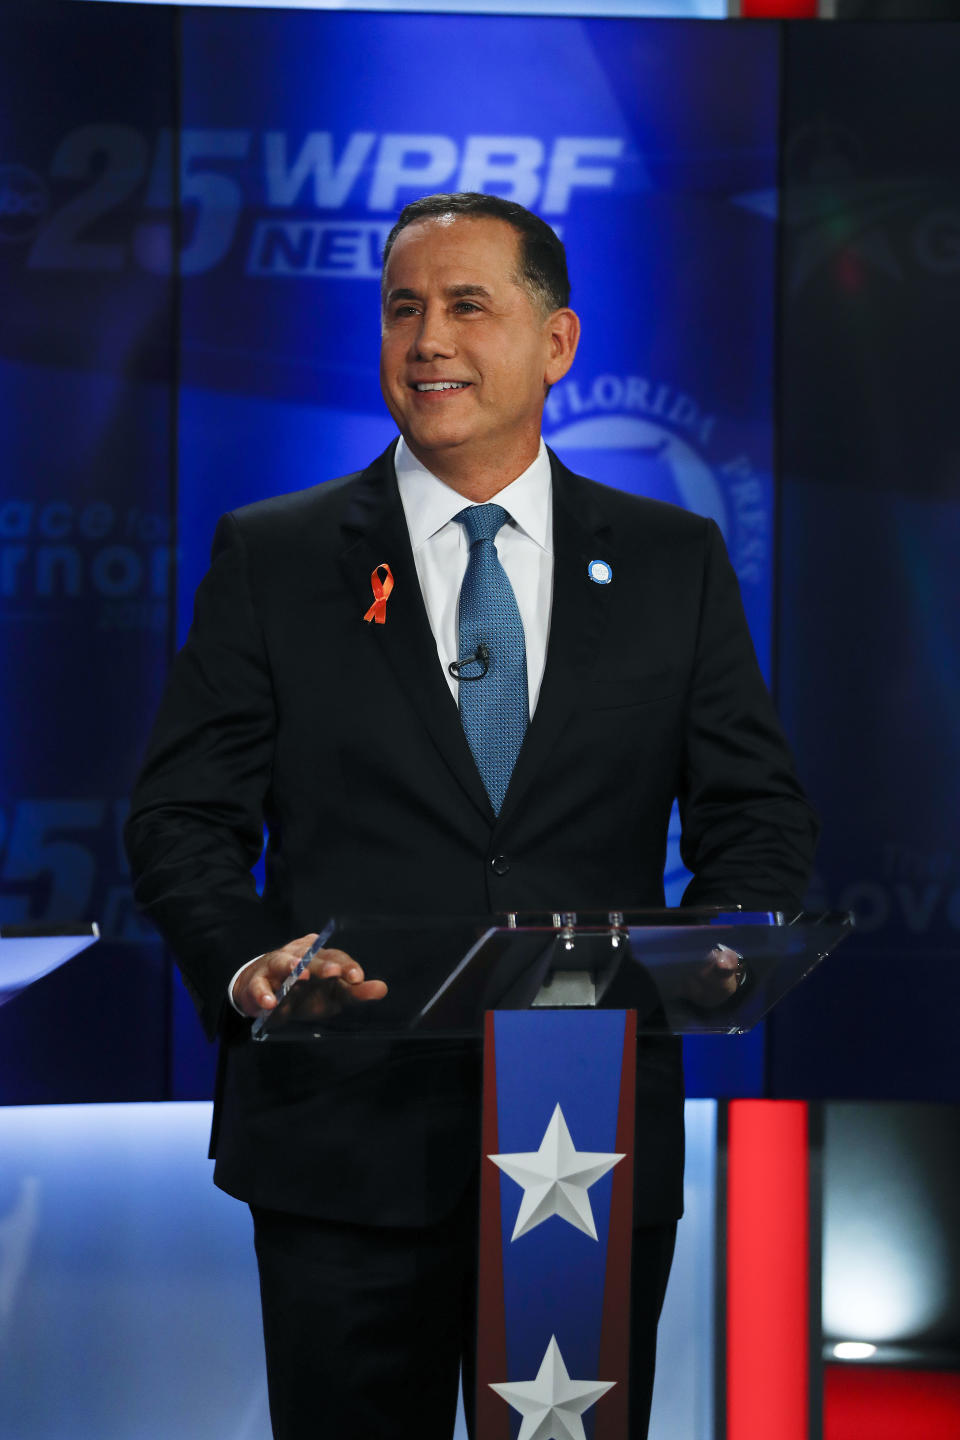 Democratic gubernatorial candidate Philip Levine awaits the start of a debate ahead of the Democratic primary for governor, Thursday, Aug. 2, 2018, in Palm Beach Gardens, Fla. (AP Photo/Brynn Anderson)